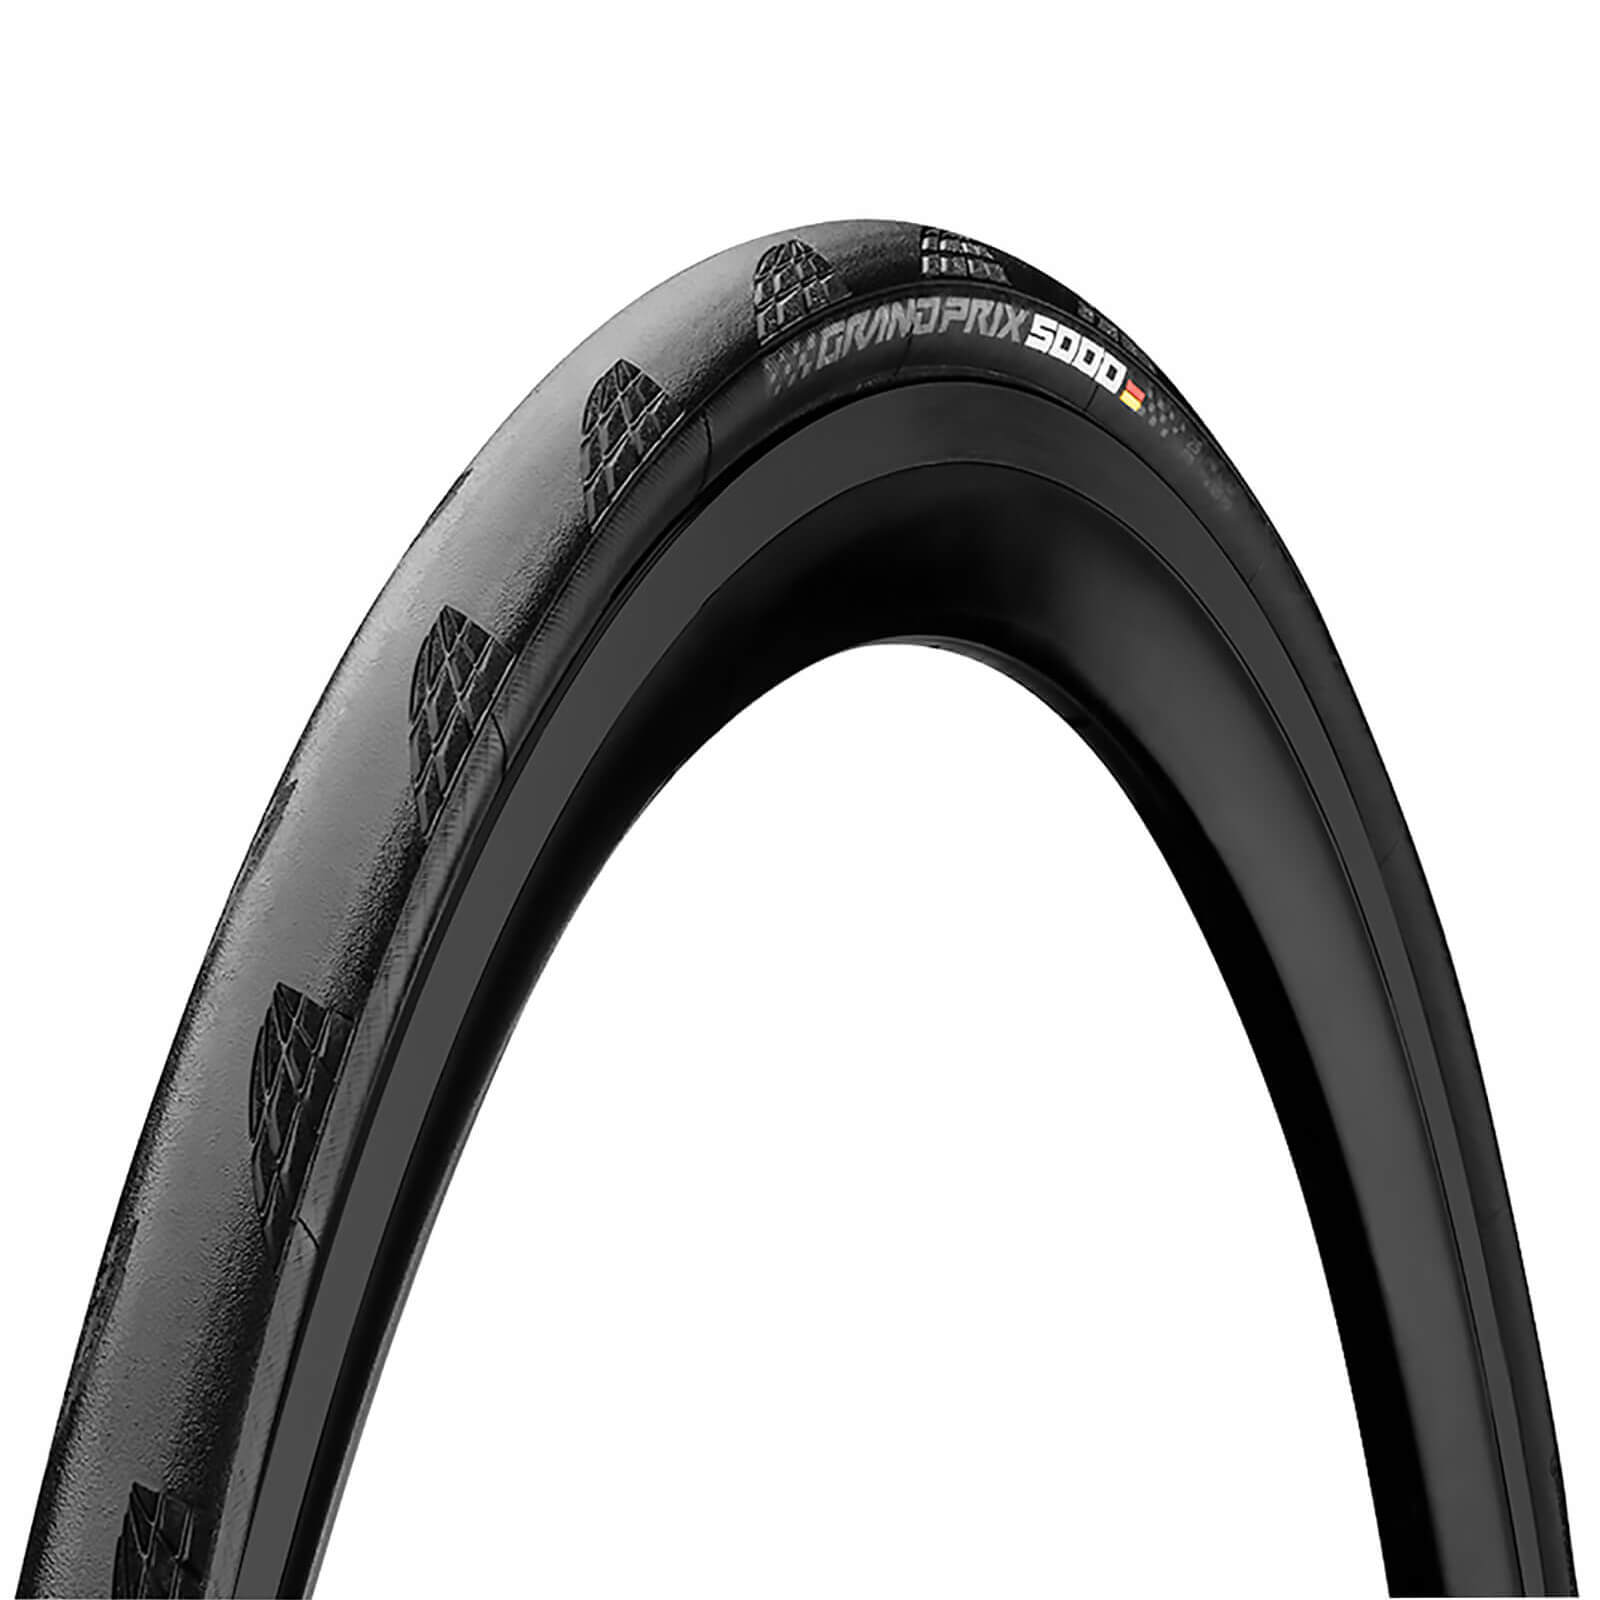 Image of Continental Grand Prix 5000 Clincher Road Tyre - 700c x 23mm